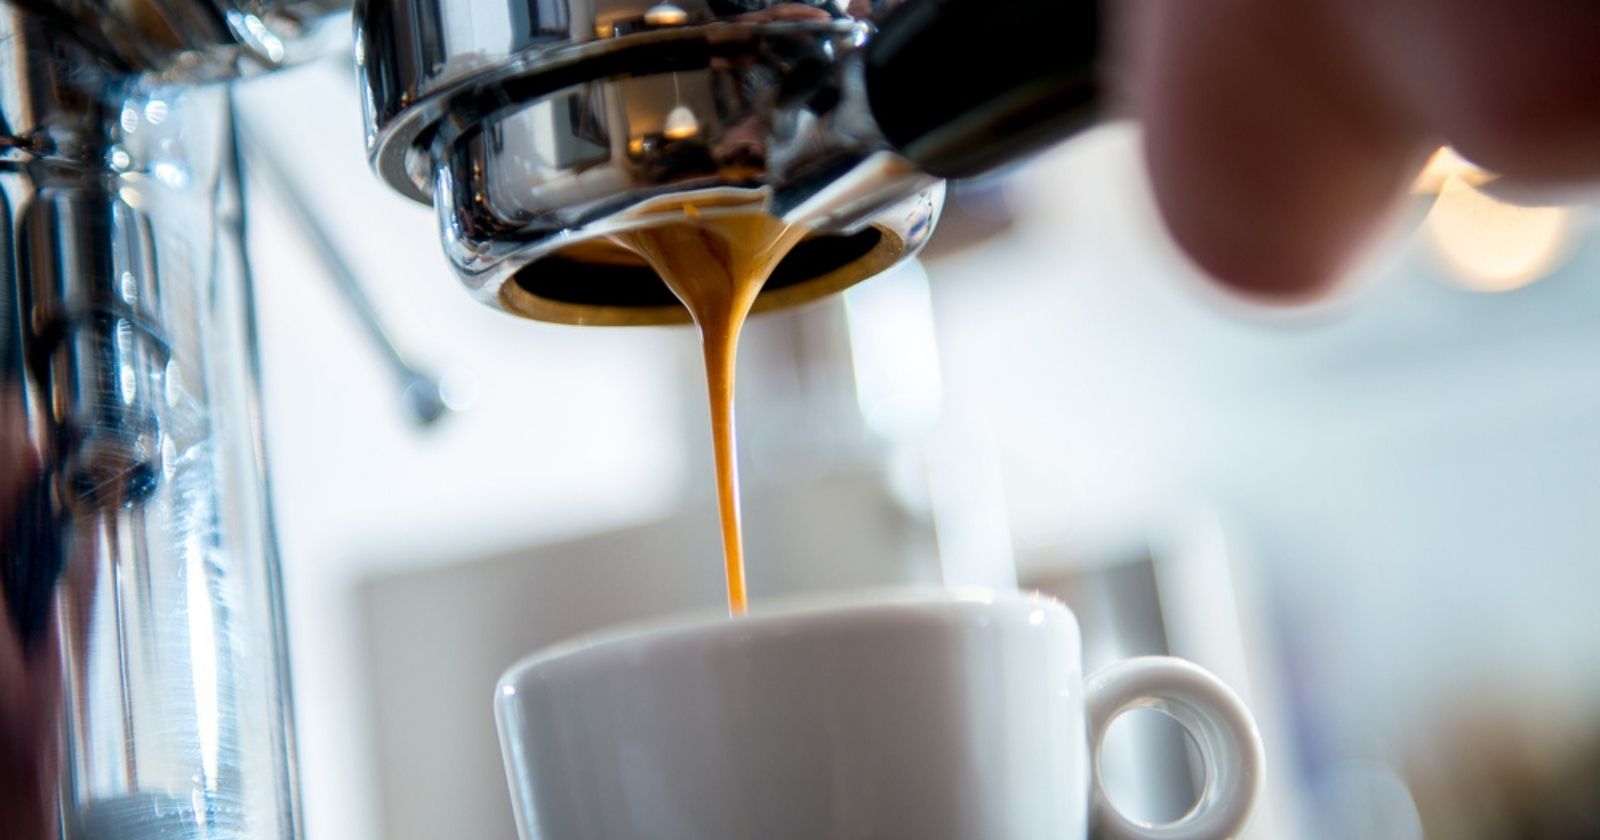 Espresso, piston, Italian: which coffee machine do you choose to limit the ecological impact?